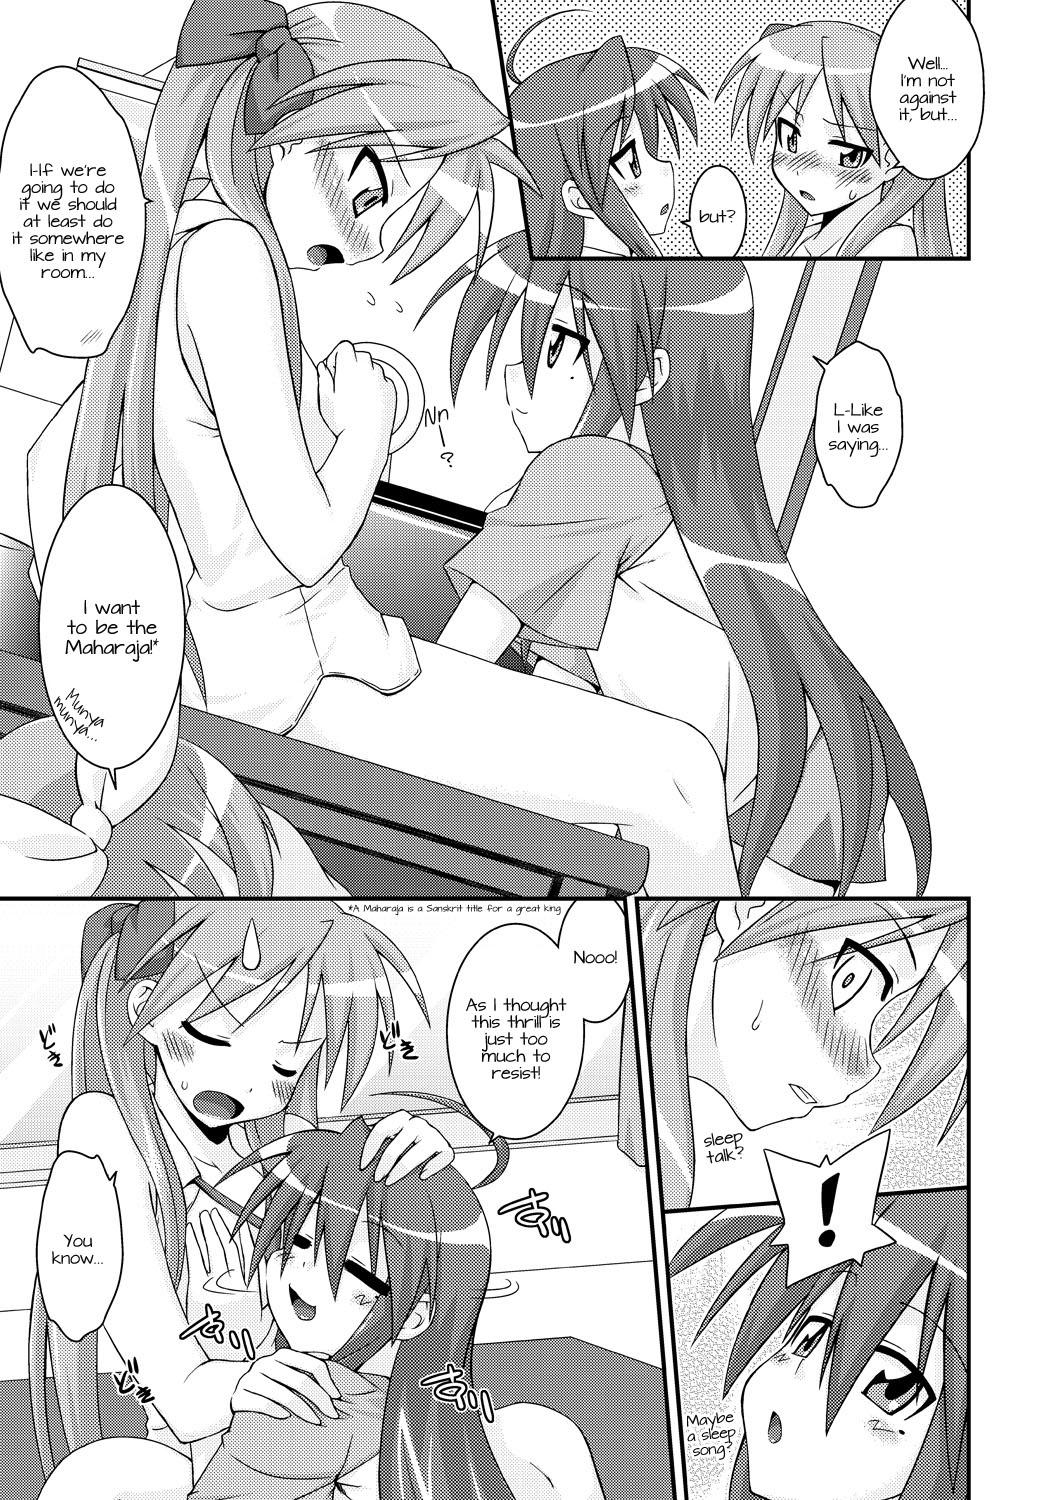 From Jam Star - Lucky star Mojada - Page 6